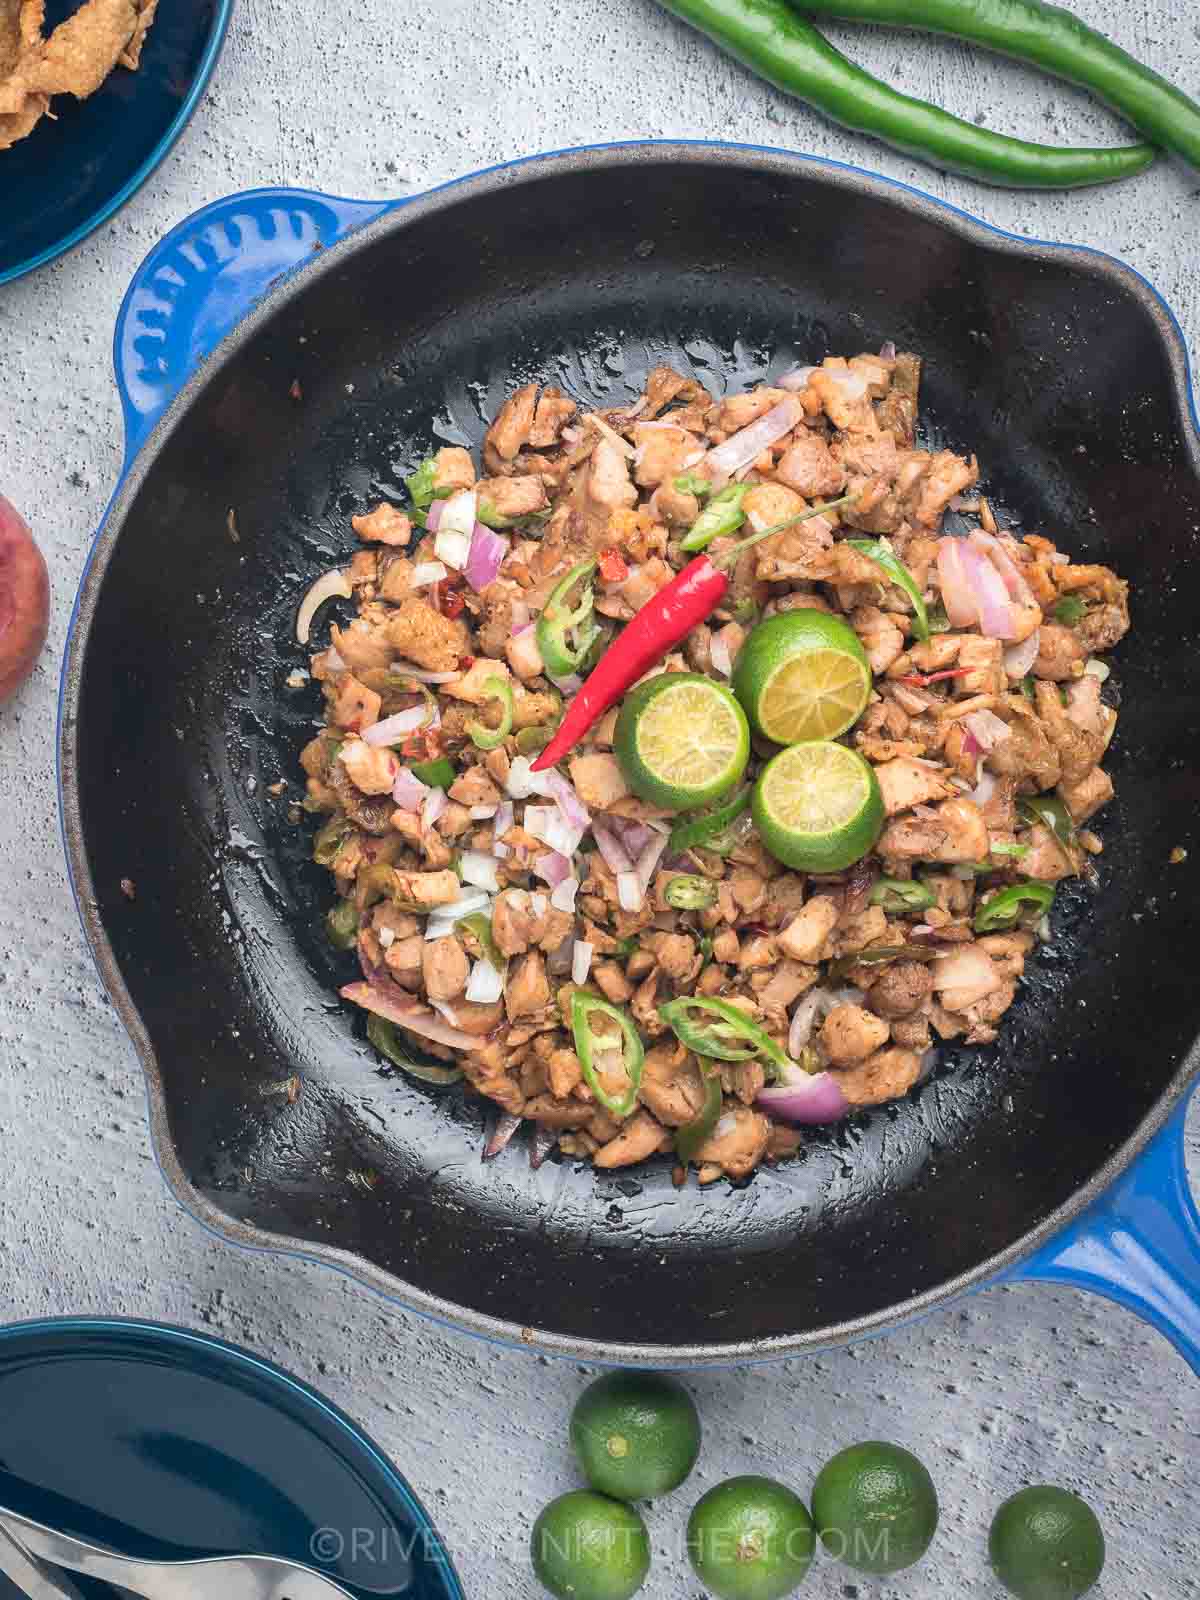 How to make Sisig using Chicken